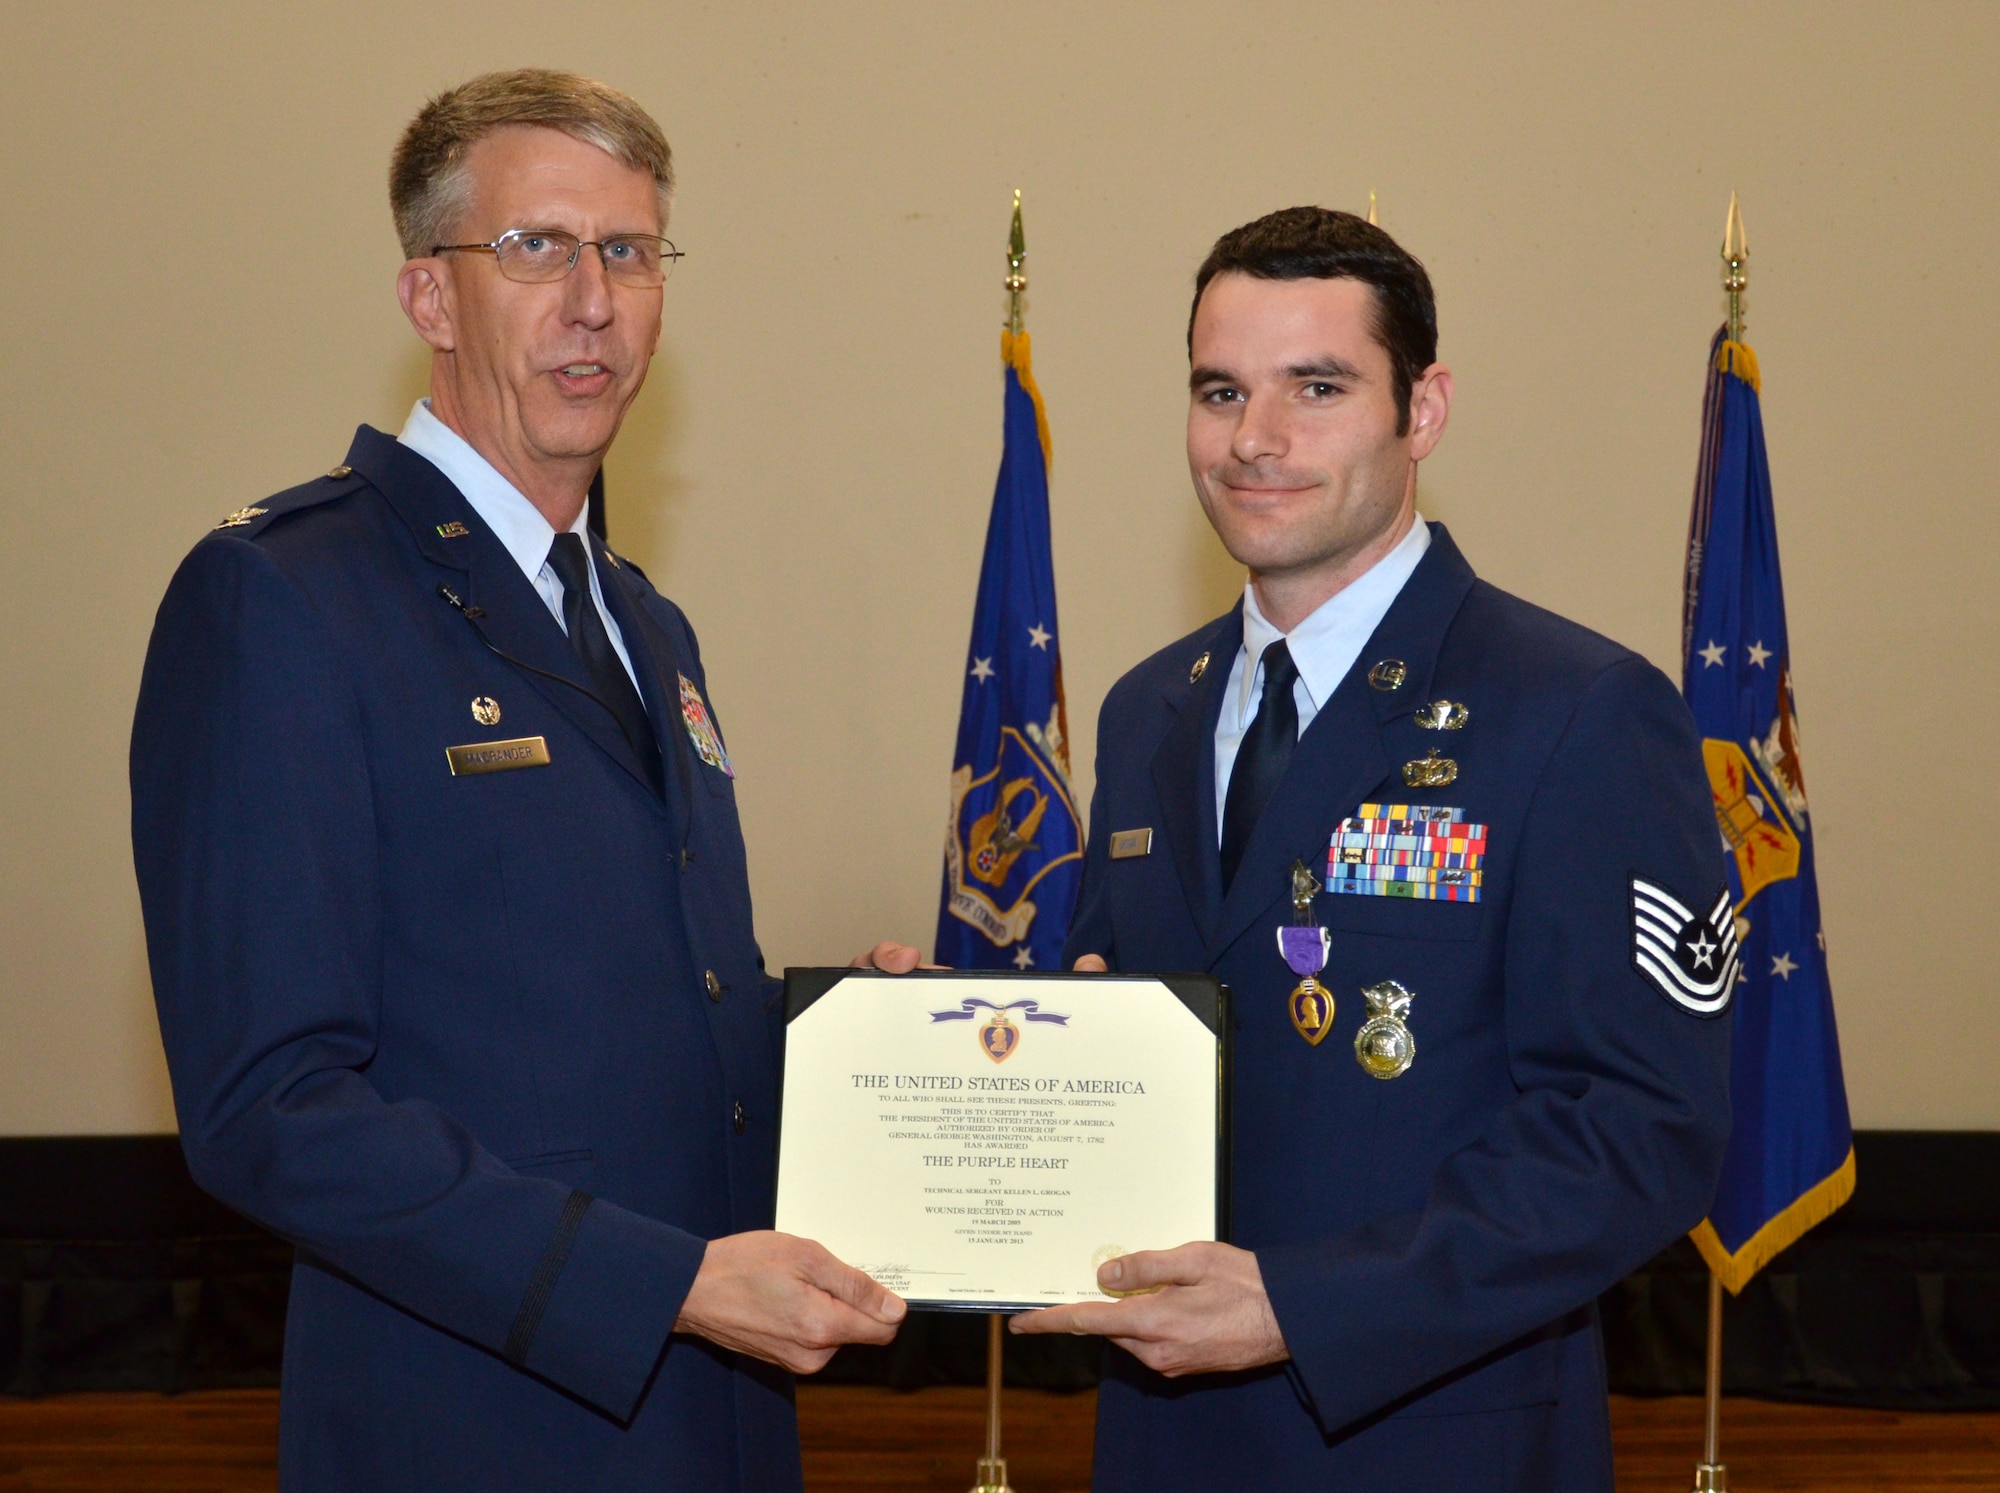 Col. Jeffrey Macrander, 920th Rescue Wing commander, presents Tech. Sgt. Kellen Grogan, 920th Security Forces Squadron squad trainer, the certificate to accompany his Purple Heart medal at a commander’s call March 3, 2013 at Patrick Air Force Base, Fla. Grogan was awarded the Purple Heart for wounds received in action March 19, 2005. (U.S. Air Force photo/Tech. Sgt. Anna-Marie Wyant)